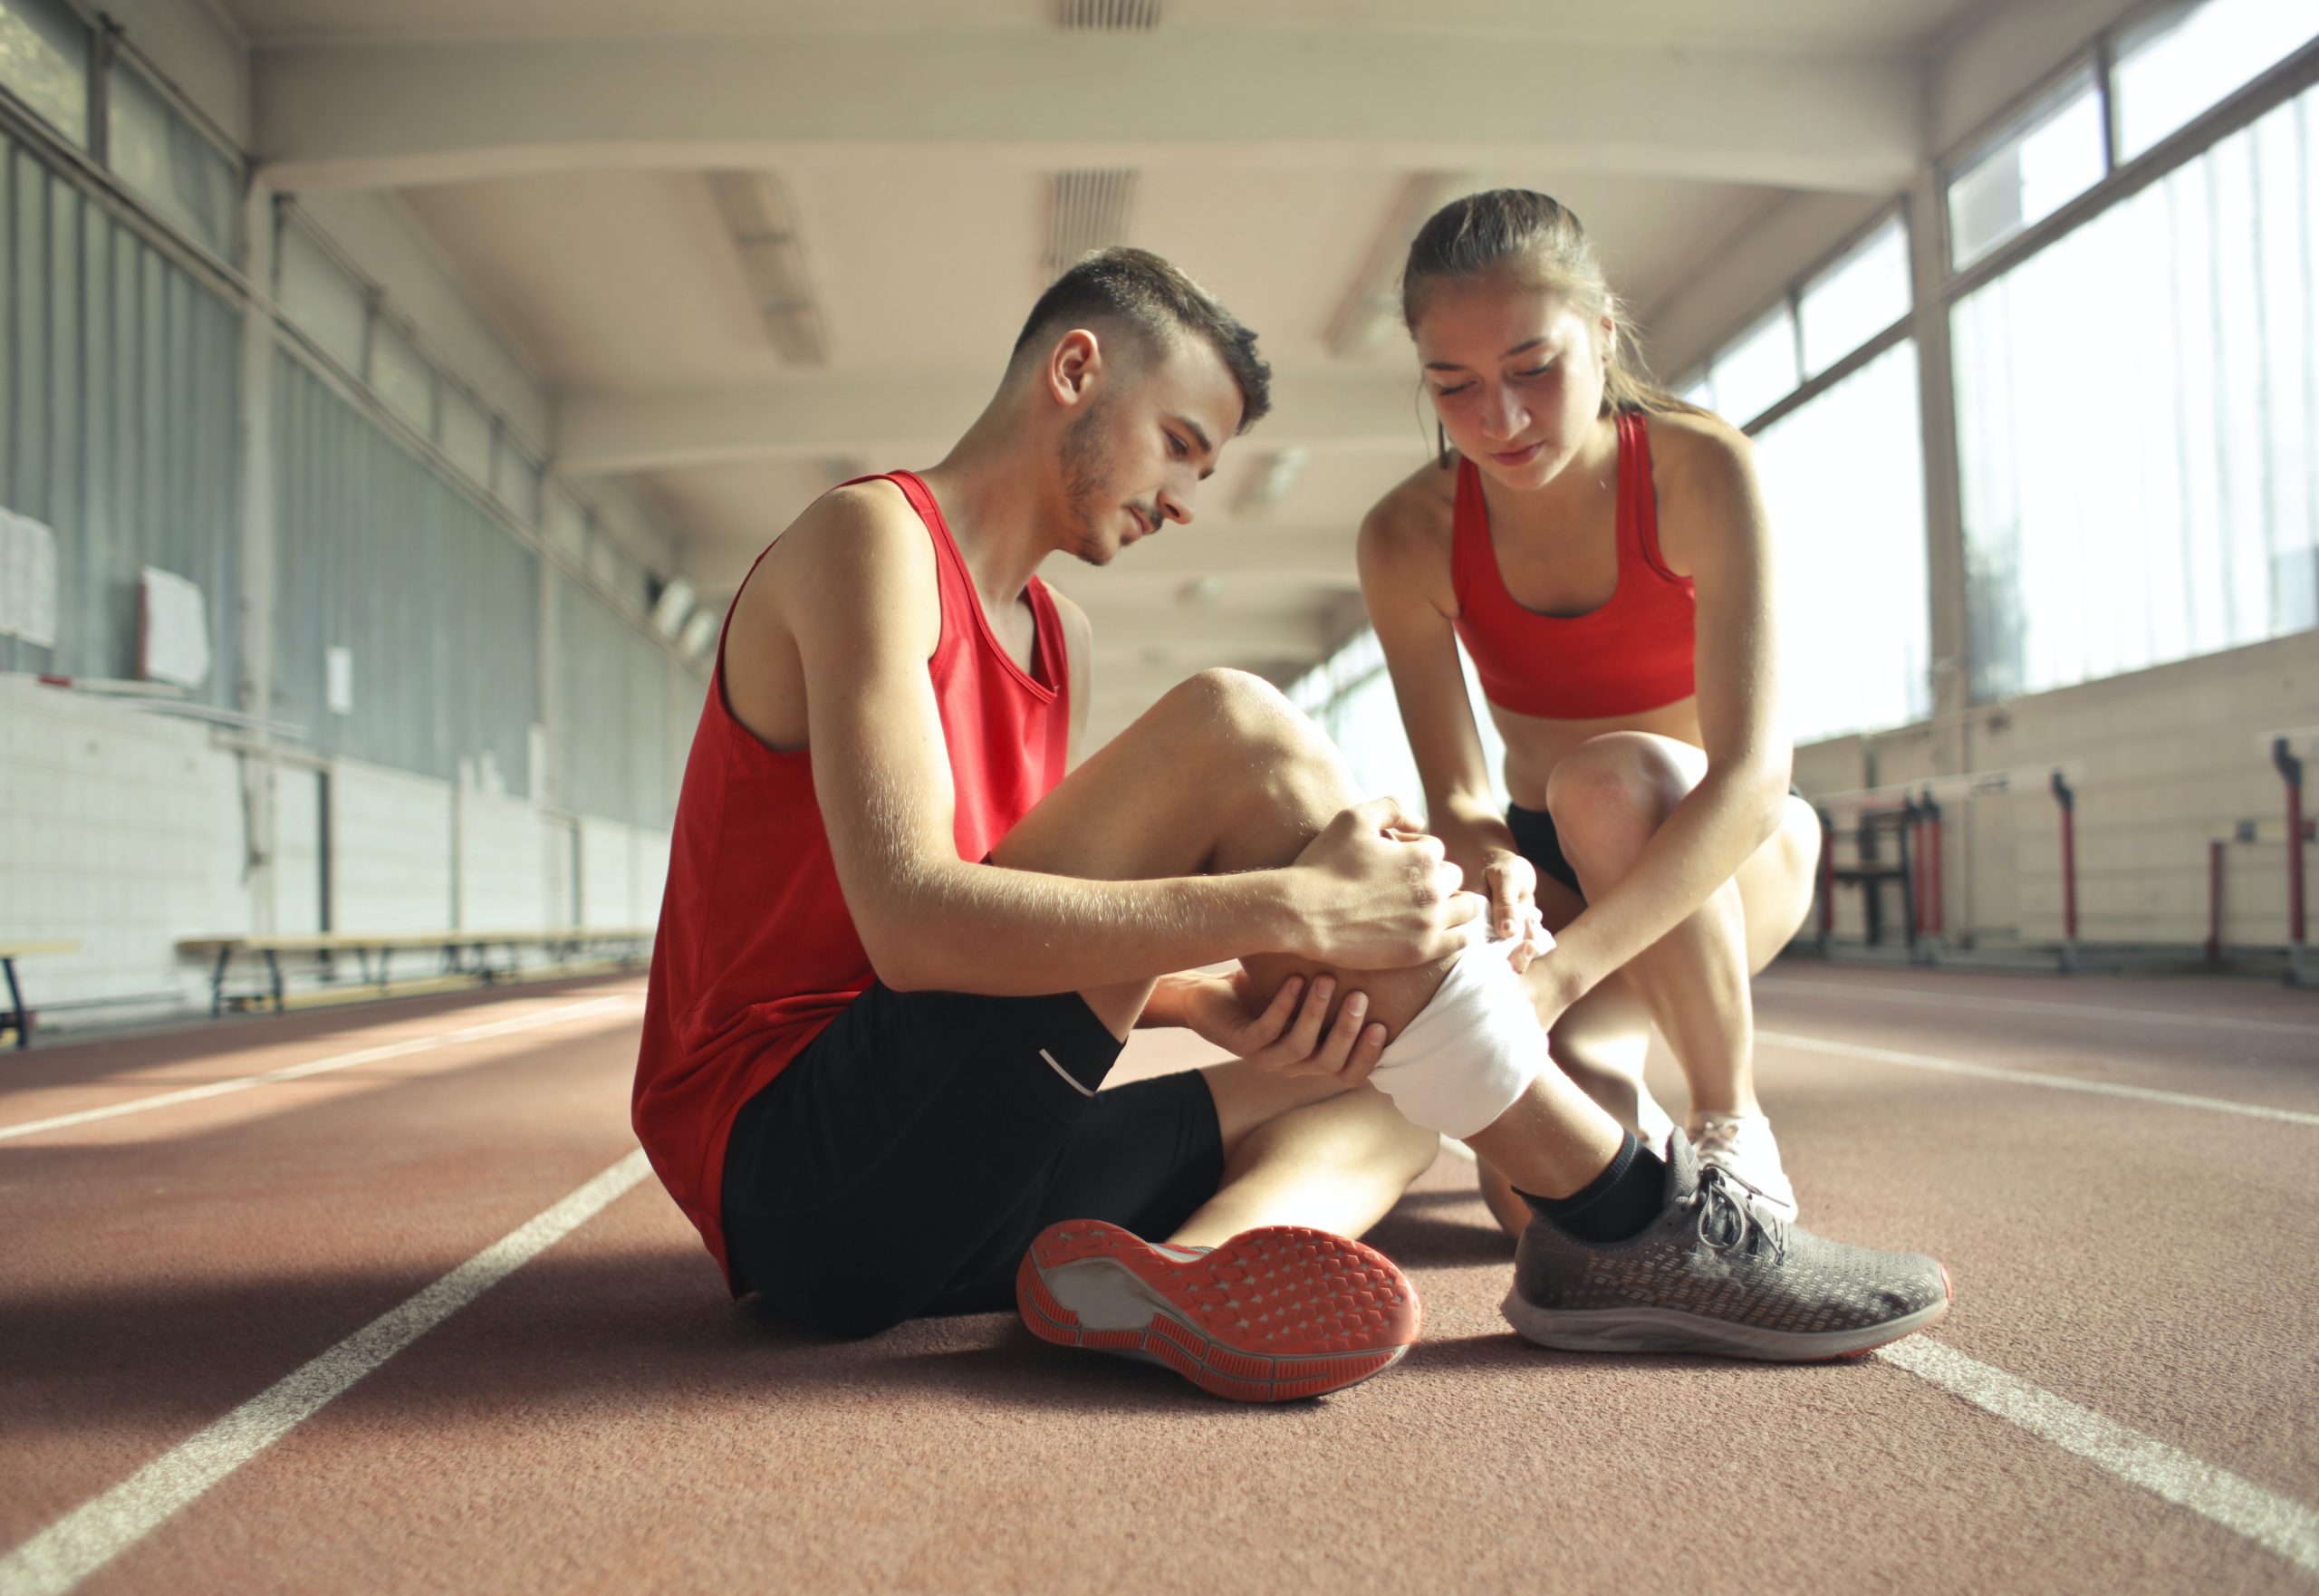 Sports injury treatment to prevent workout injuries